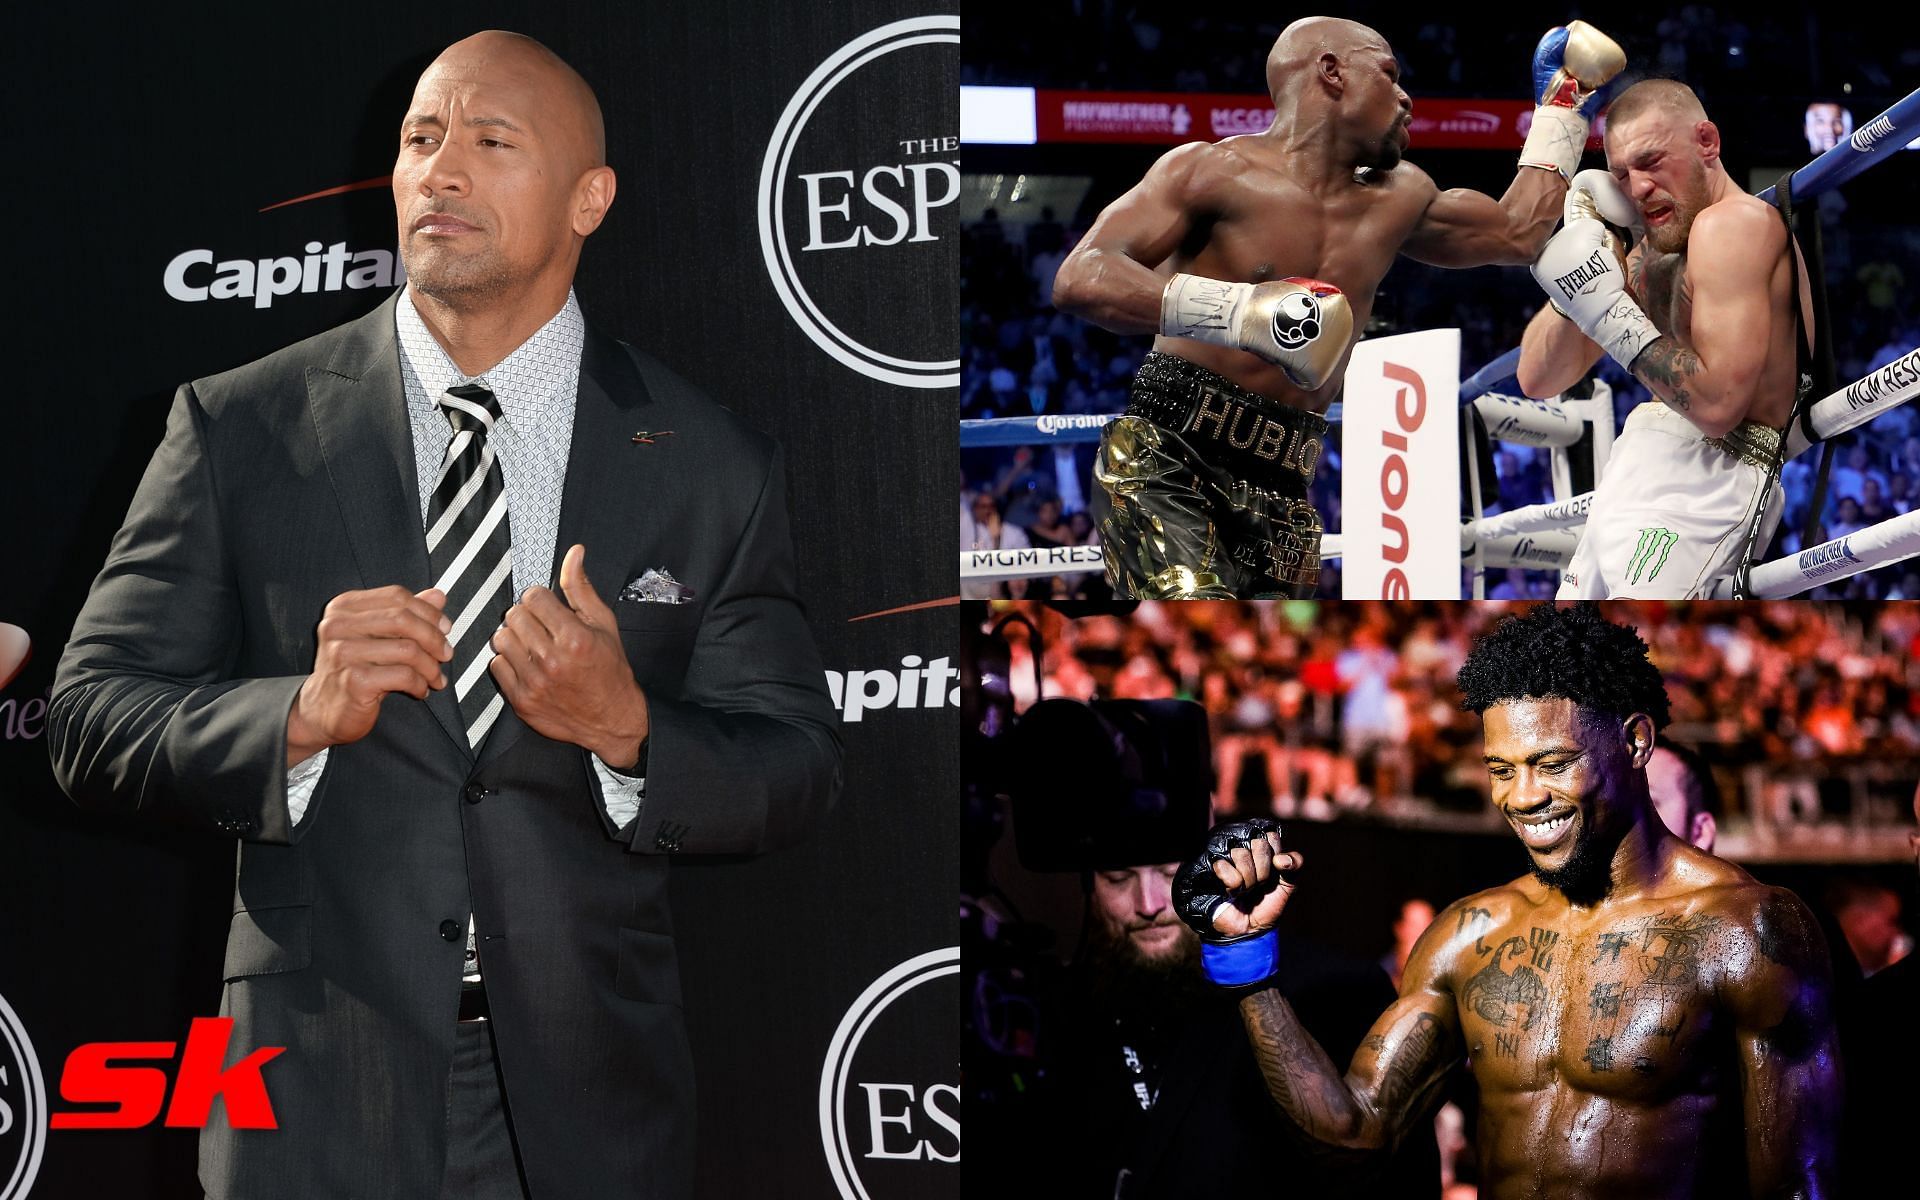 Dwayne Johnson (left), Conor McGregor vs. Floyd Mayweather (top right), Kevin Holland (bottom right)